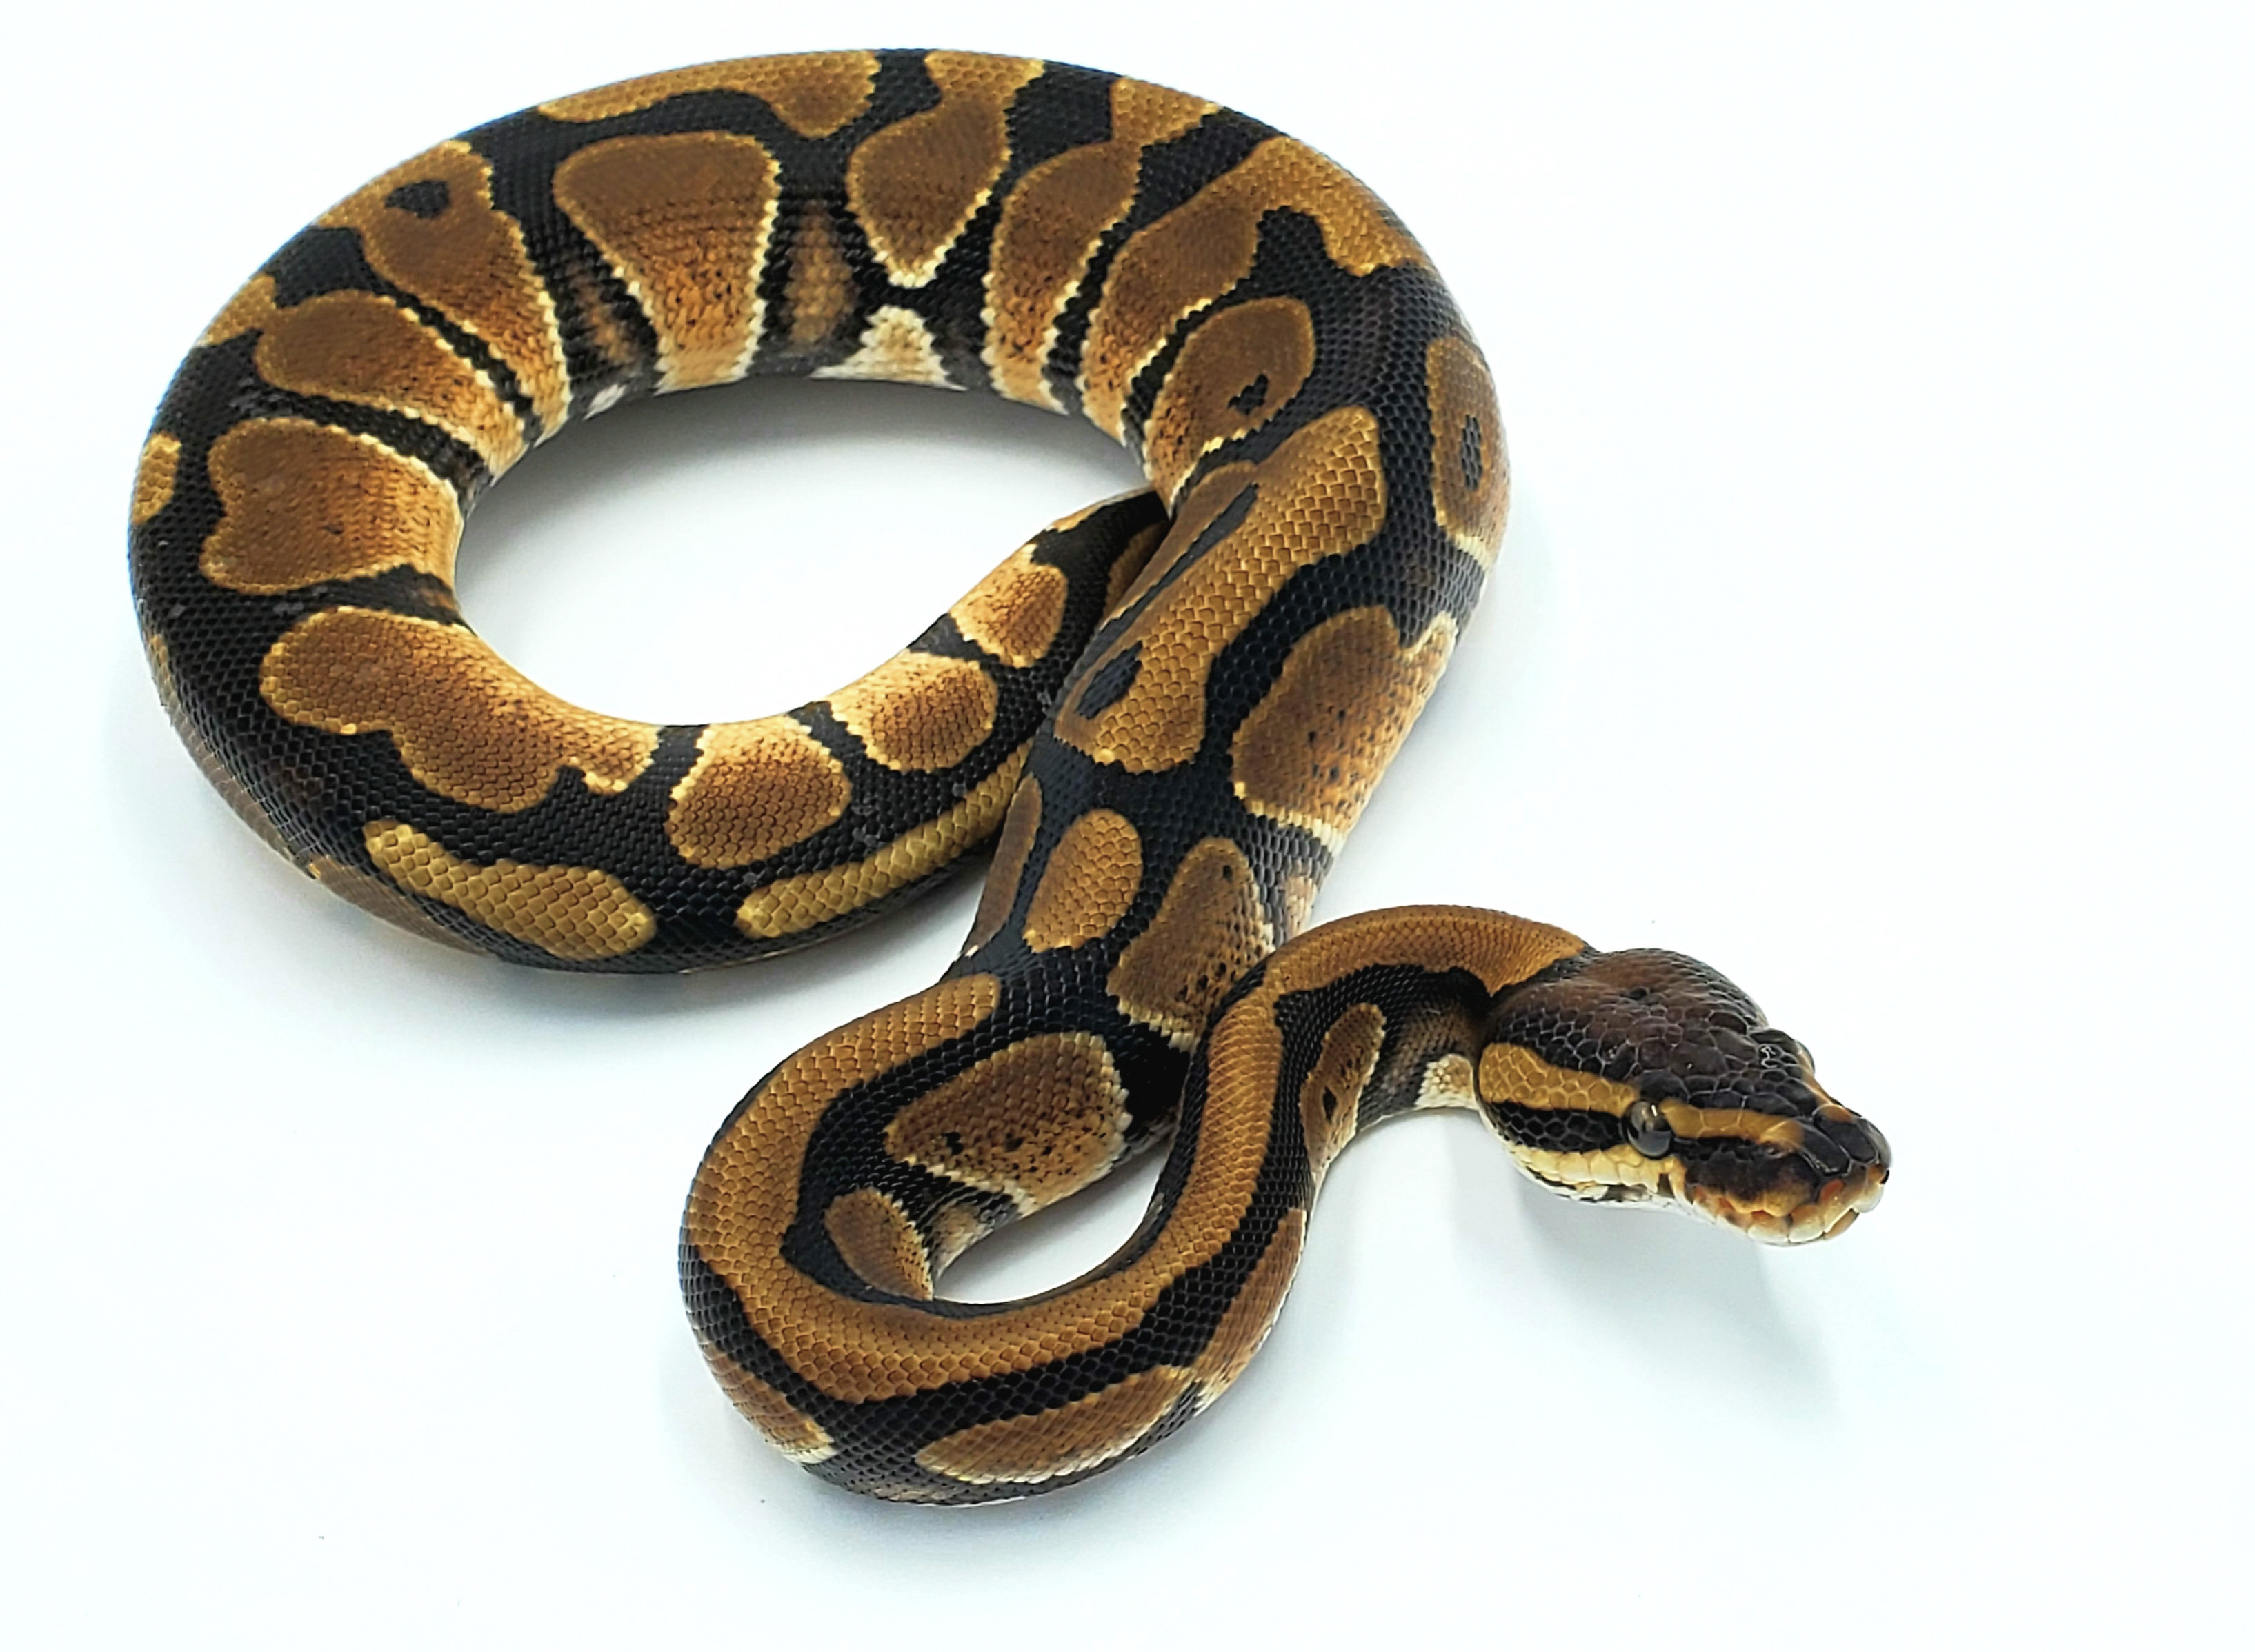 X-Treme Gene Ball Python by Scaled Creations